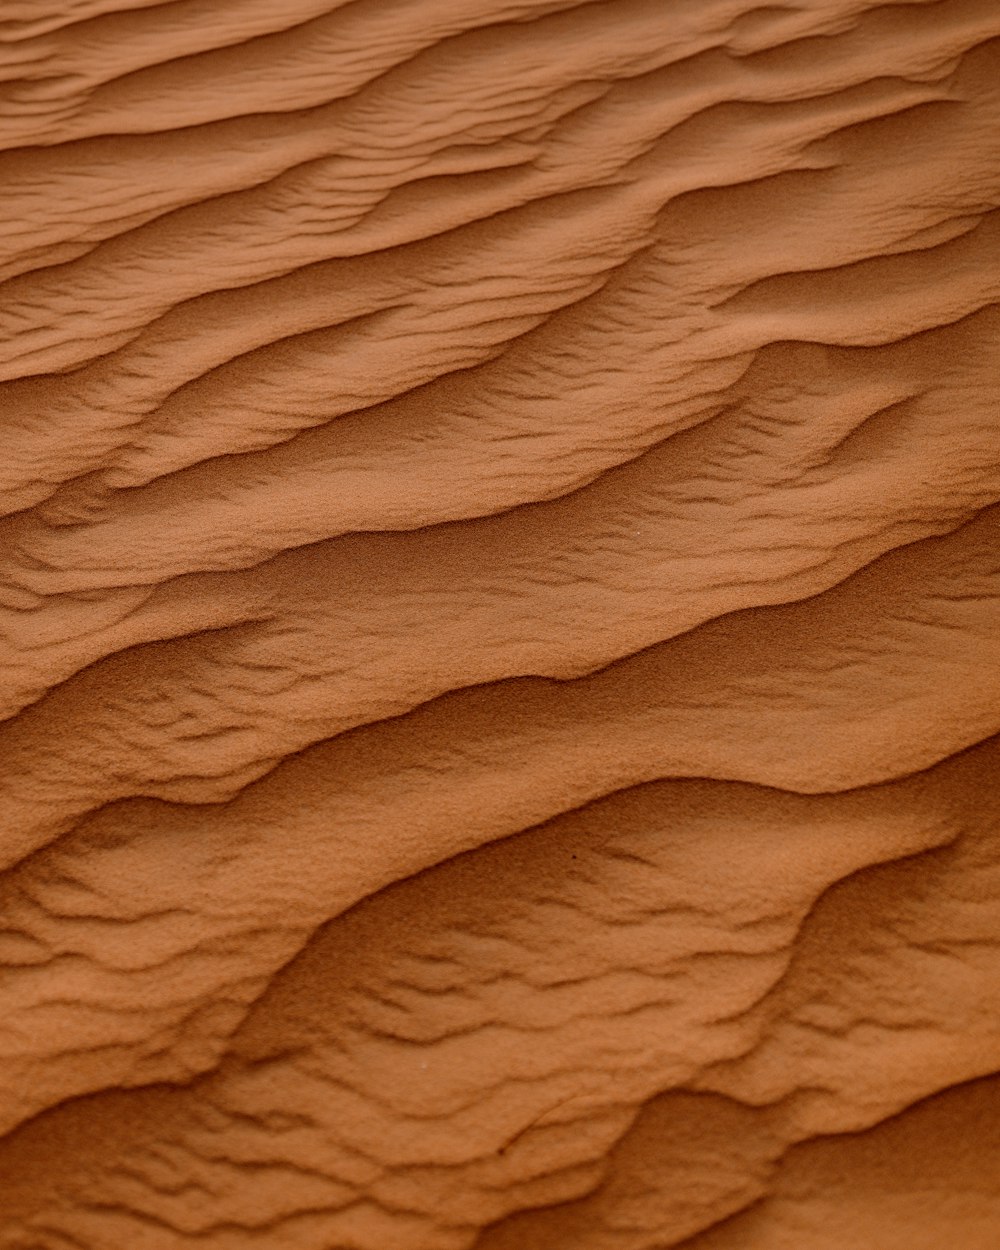 a close up of a sand dune in the desert